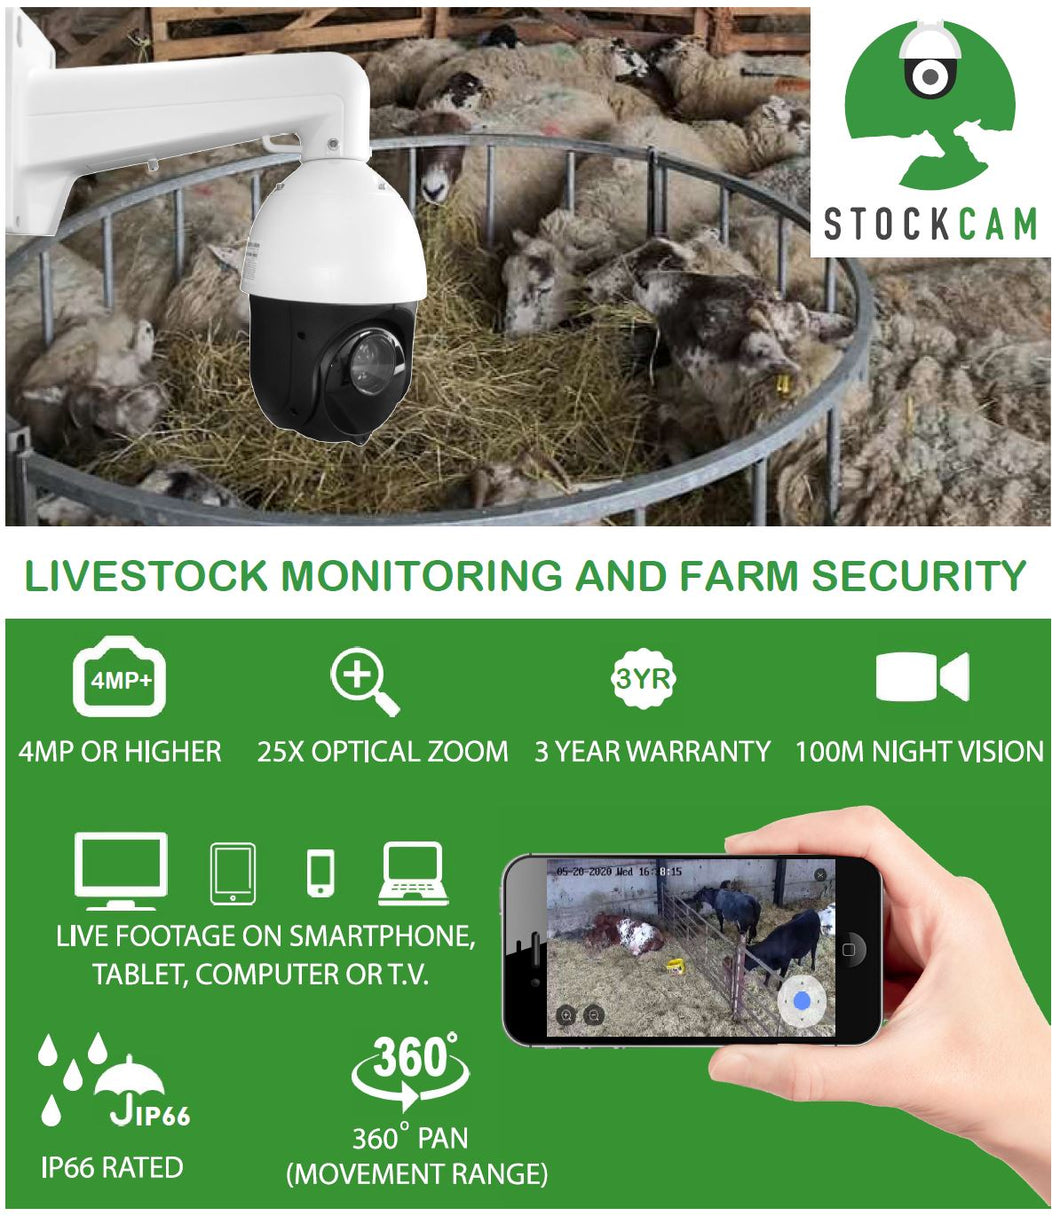 Livestock monitoring camera self-install package - exceeds the specification of the FETF grant